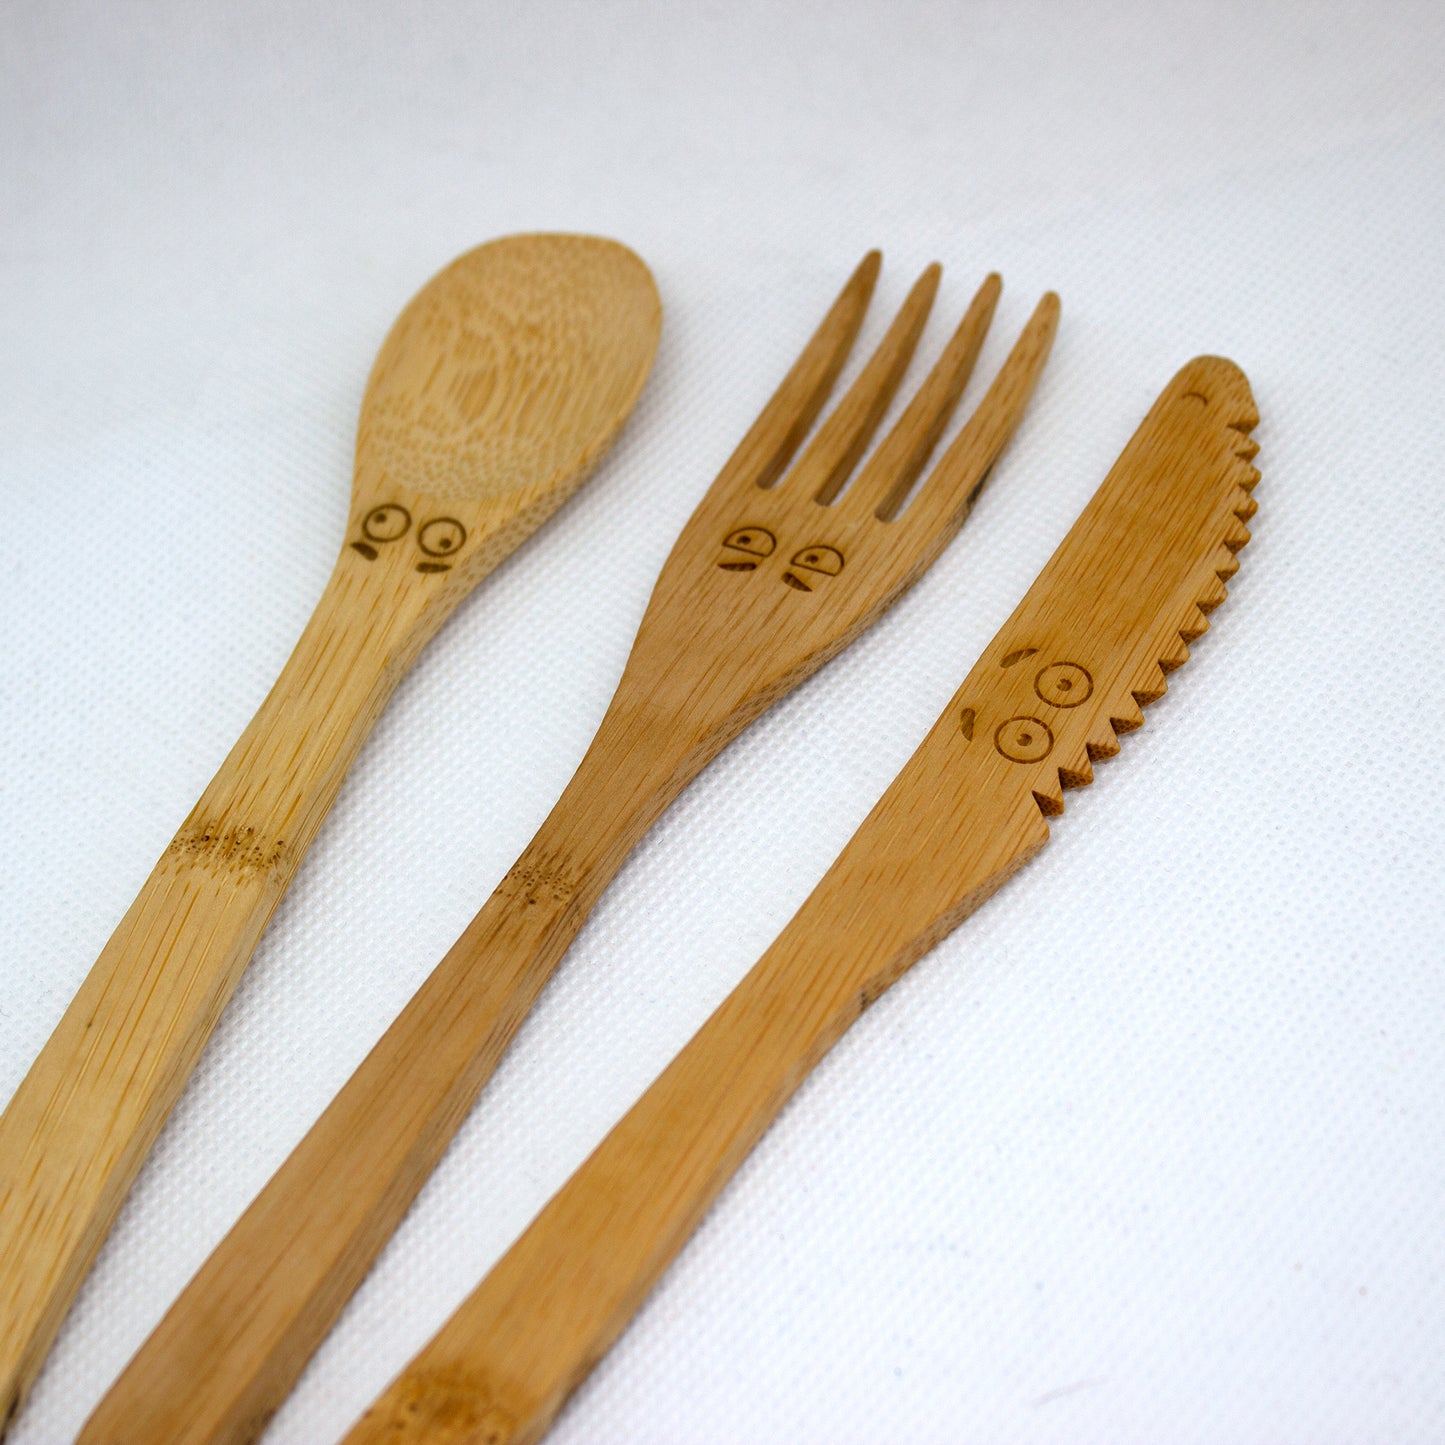 Bamboo Cutlery Set with Faces, Cutlery with Travel Case, Cutlery for Kids Packed Lunch